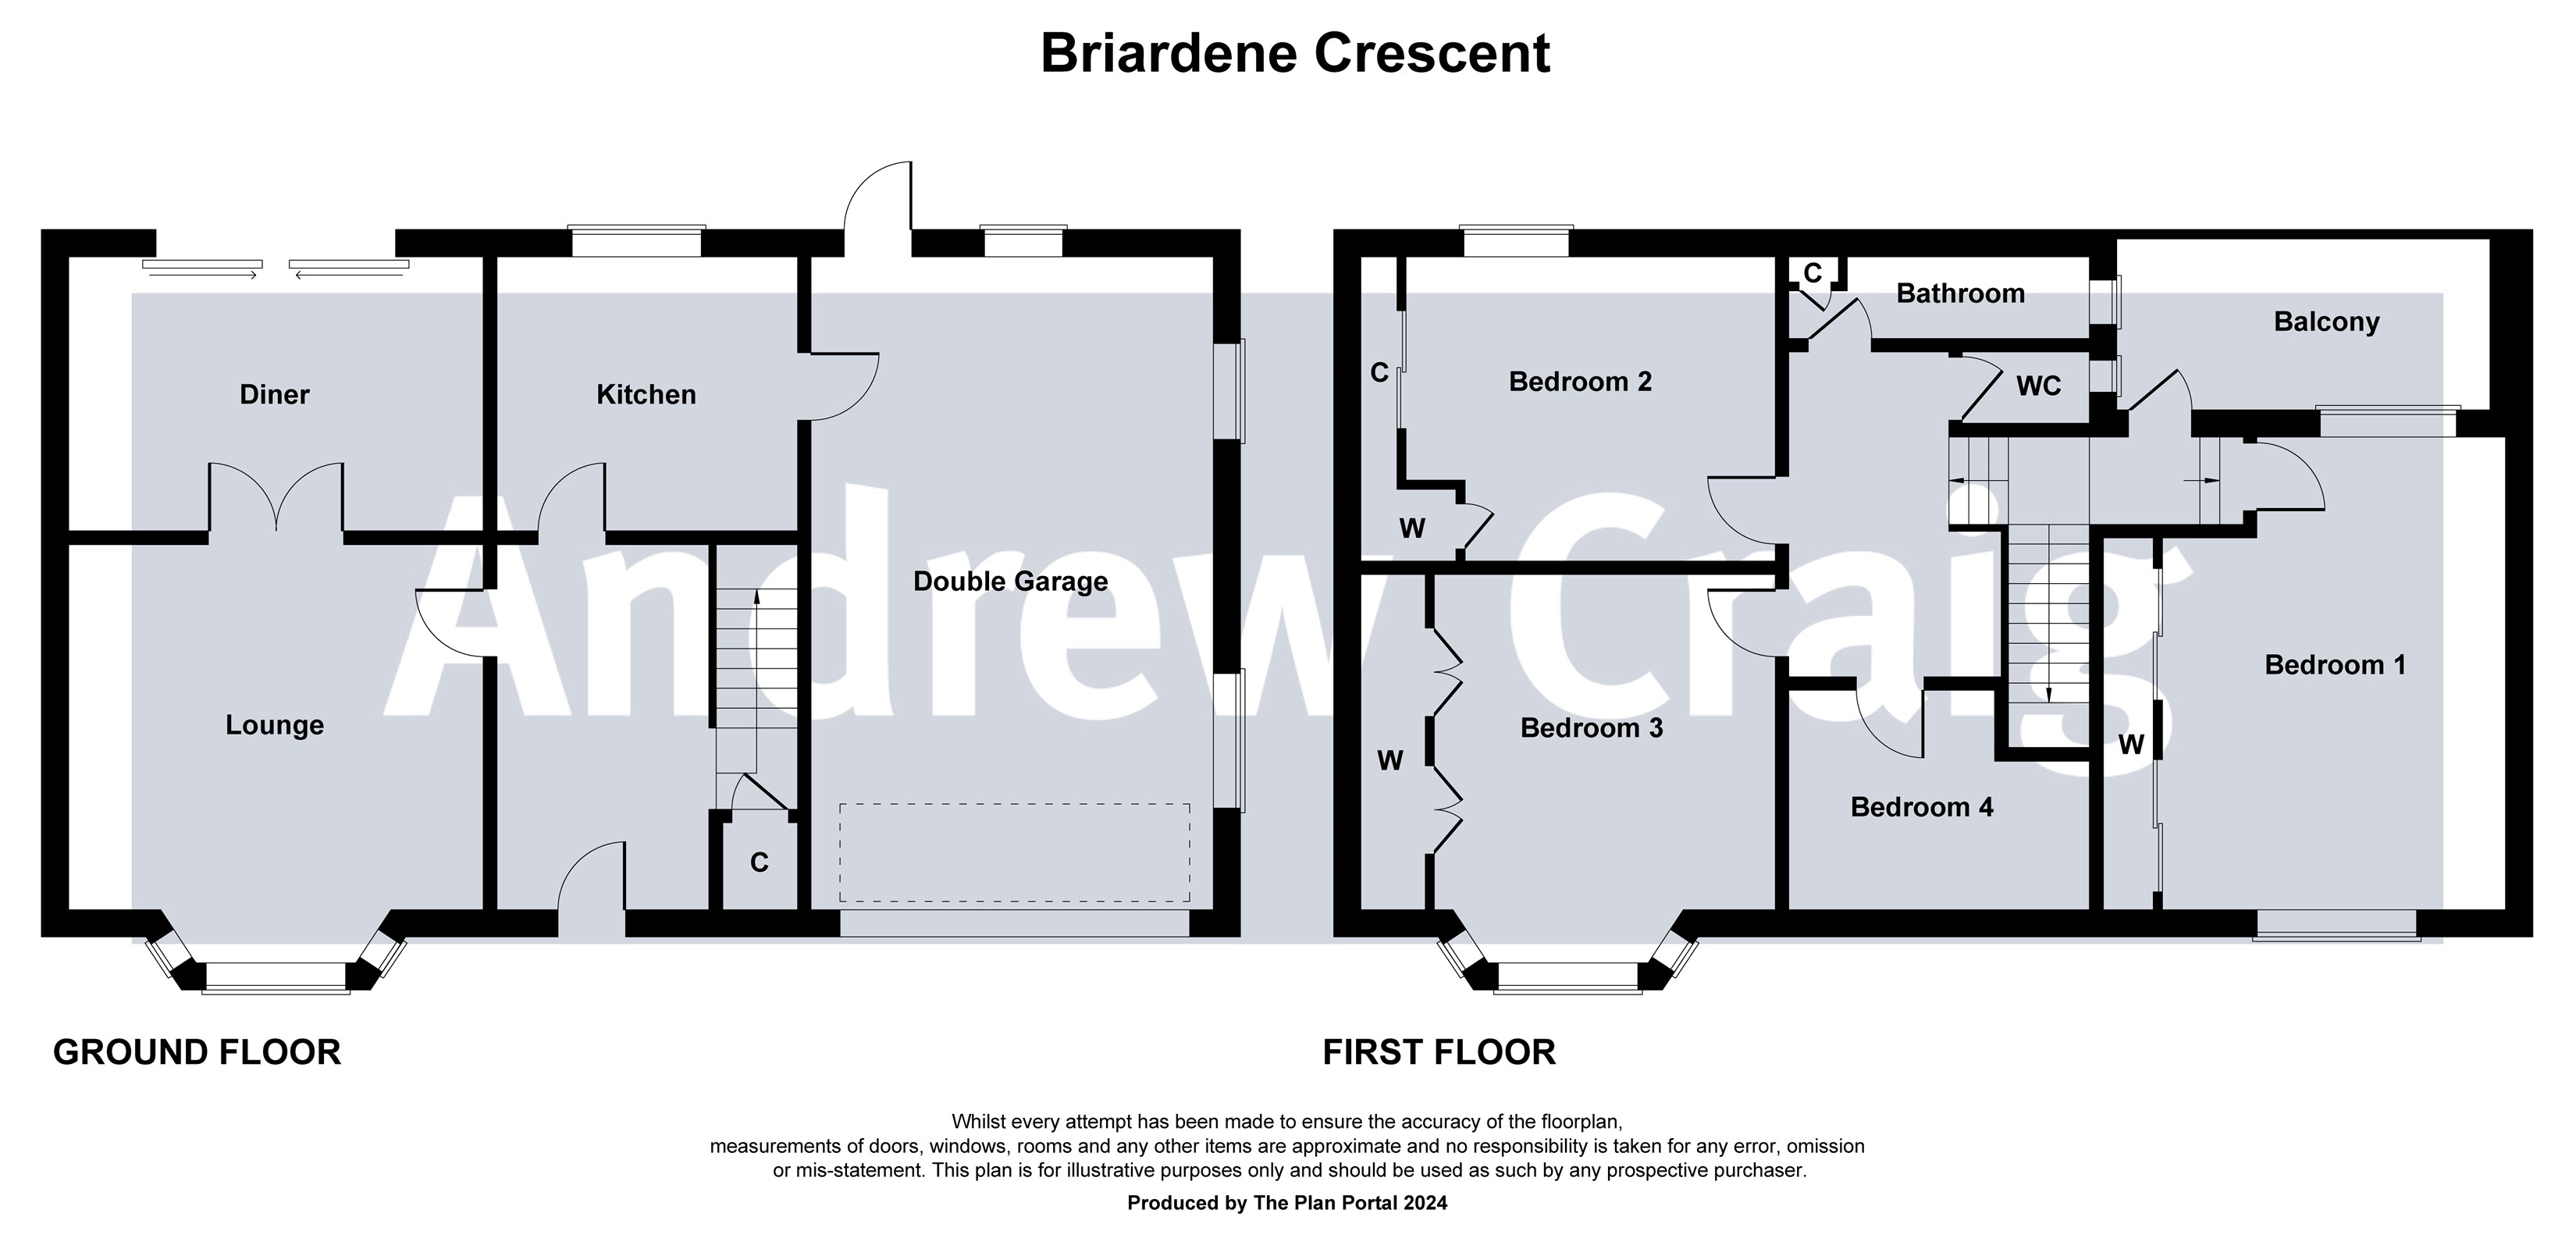 4 bed semi-detached house for sale in Briardene Crescent, Gosforth - Property floorplan